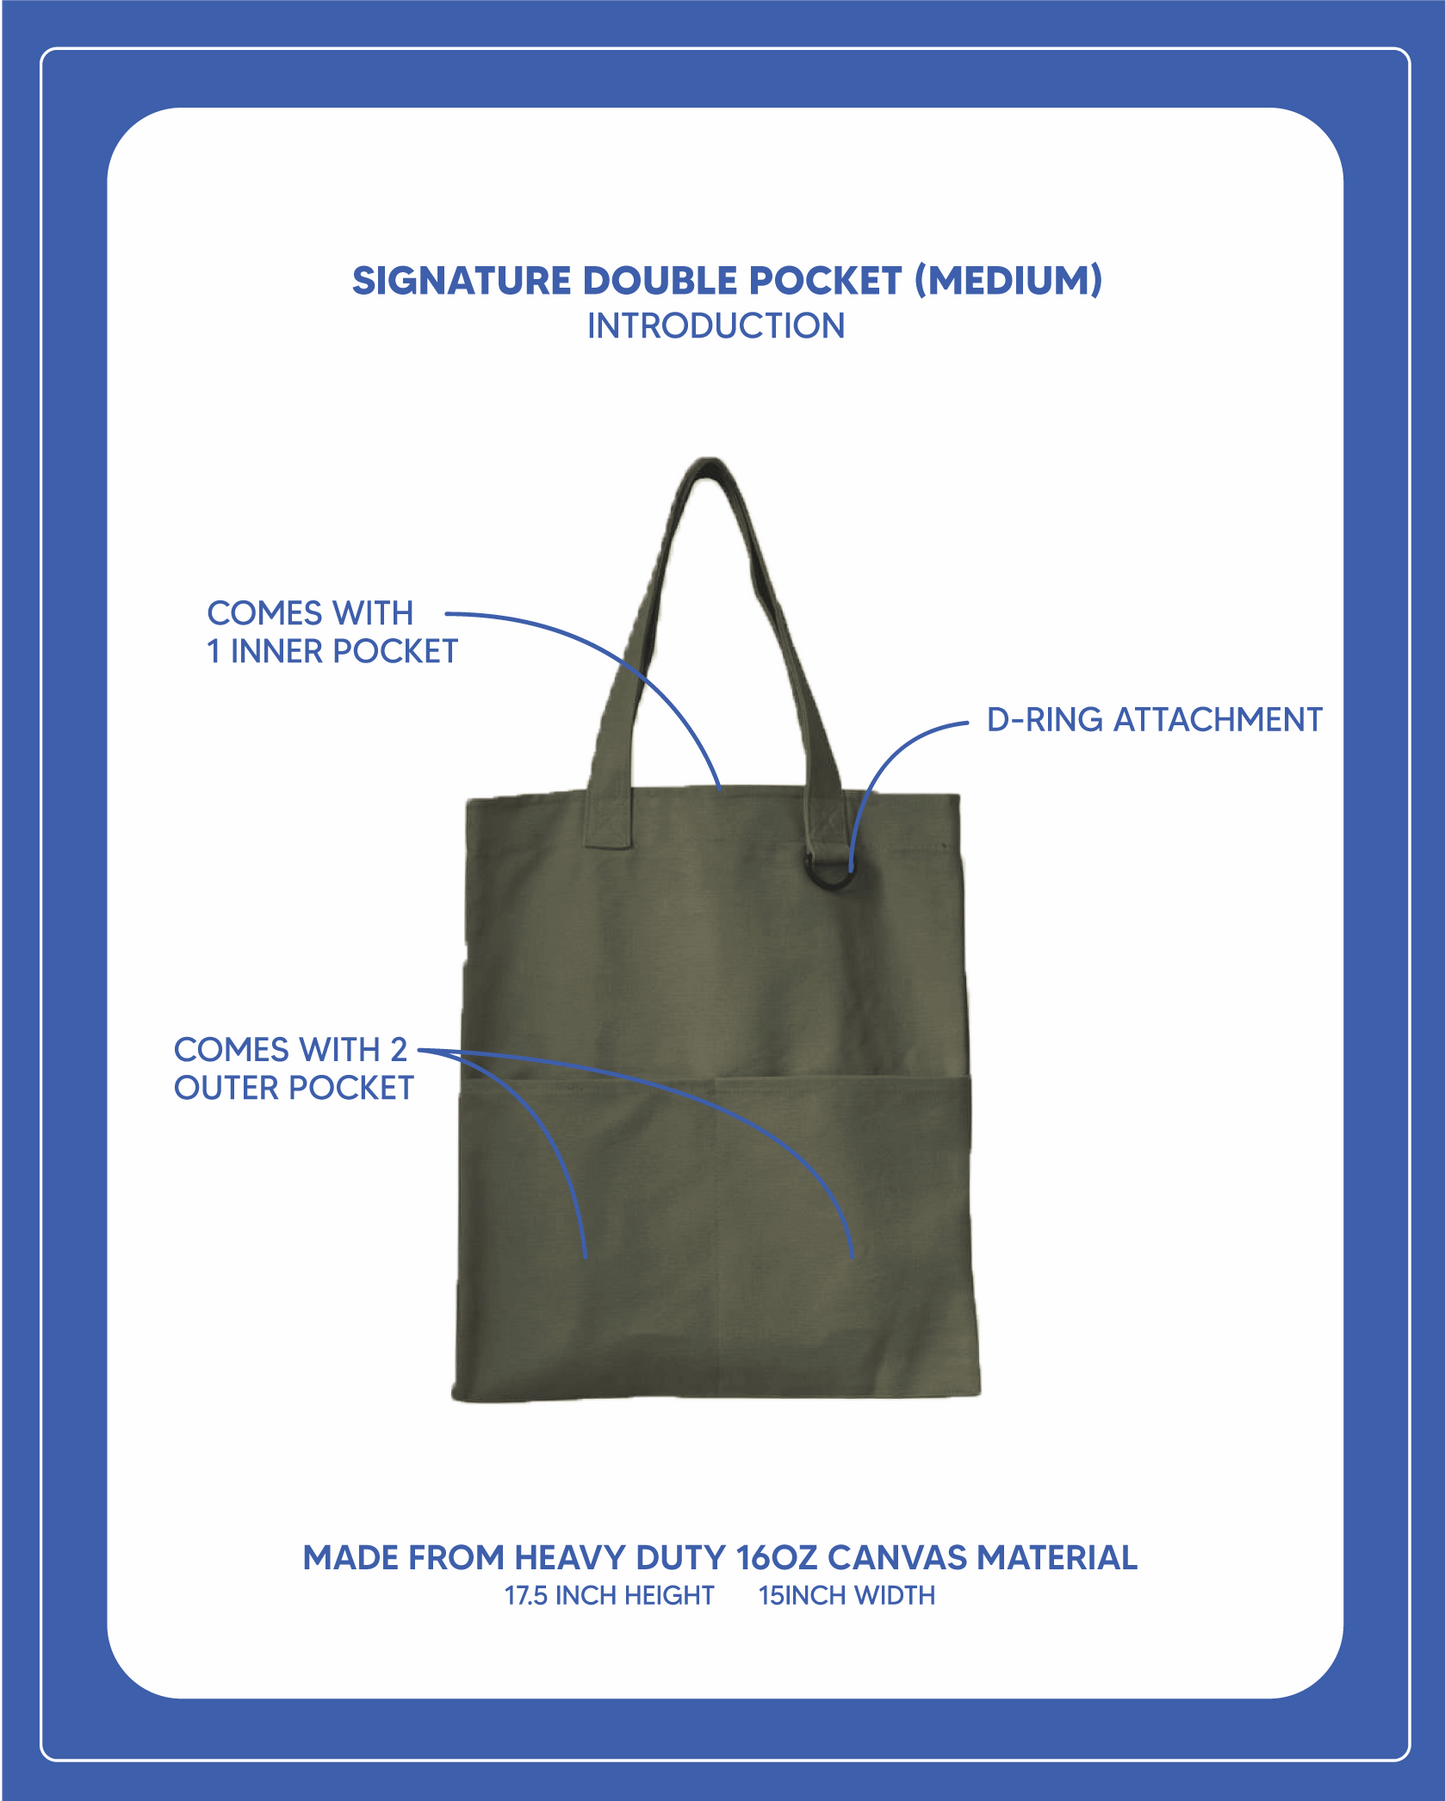 (LIMITED RUN) Double Pocket Signature Tote Medium) - Army Green